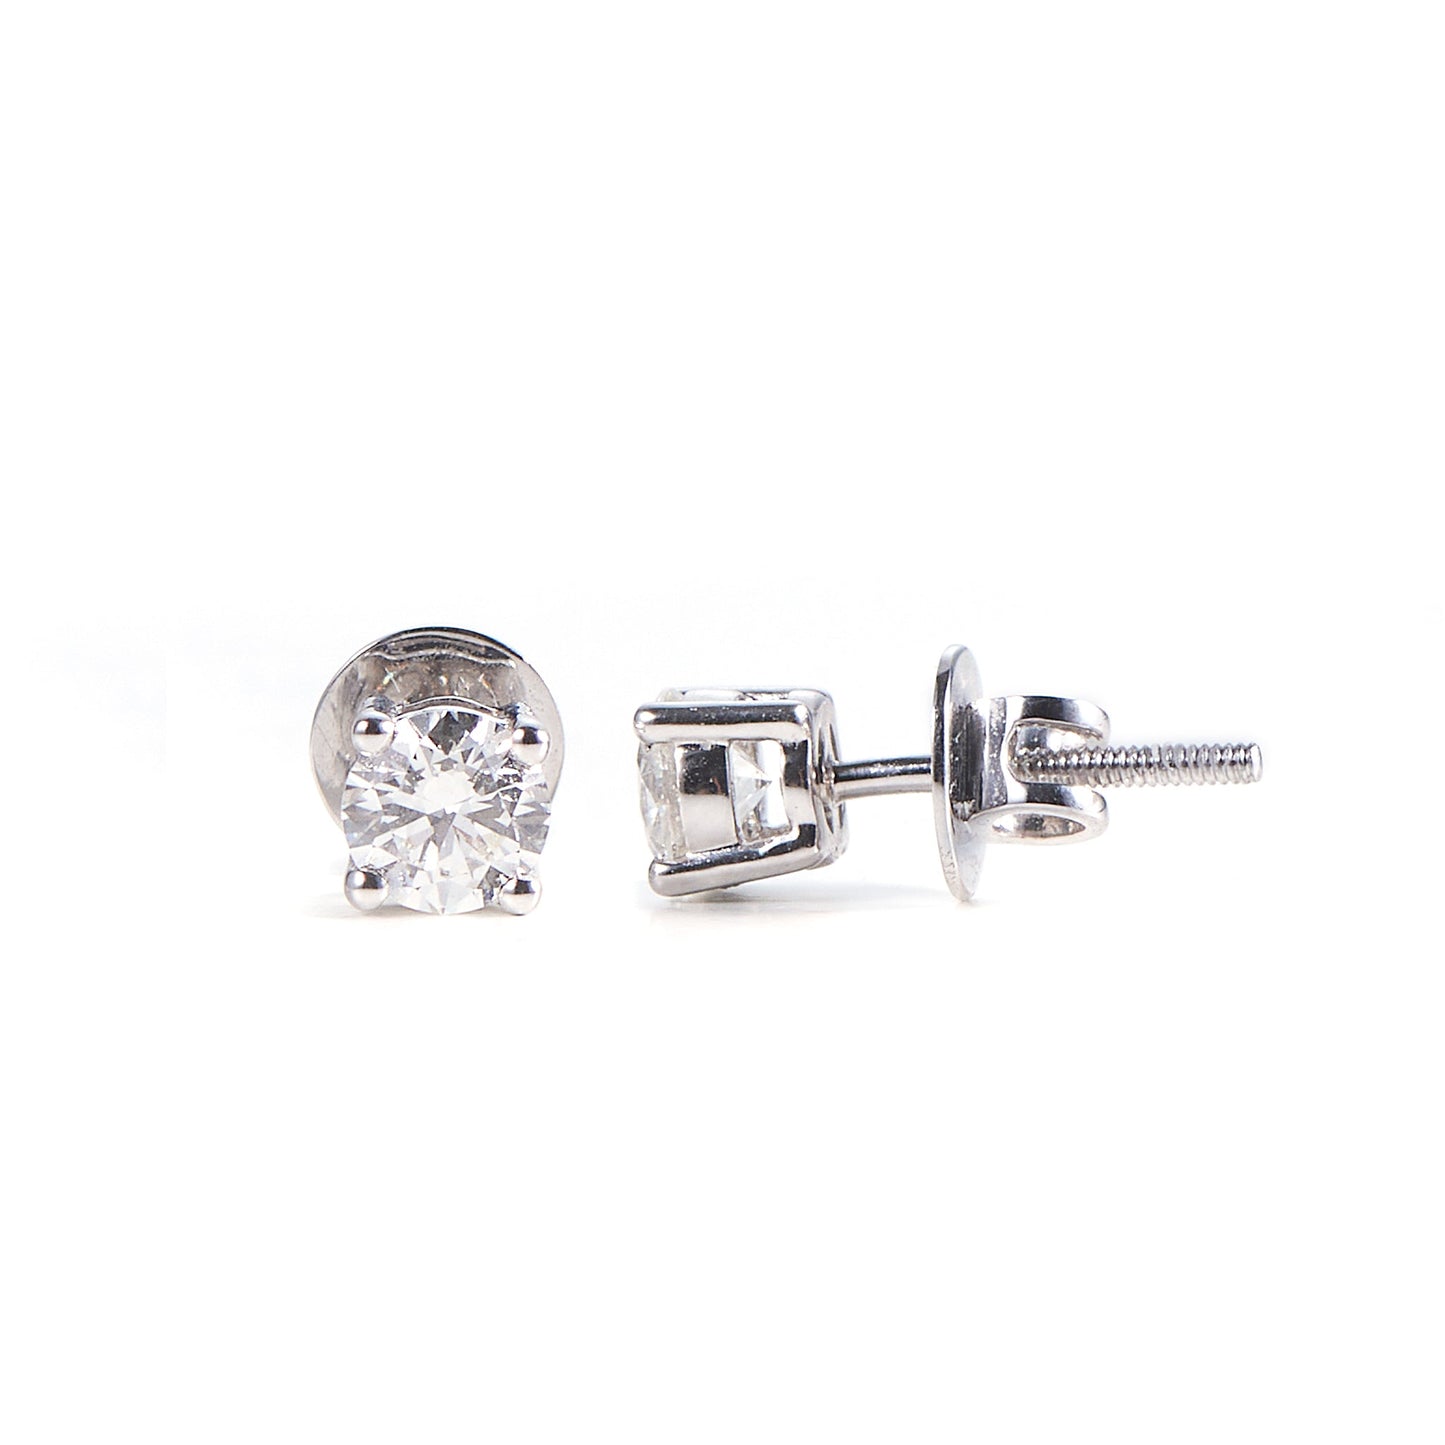 SOLITAIRE STUDS WITH 1 CRT DIAMOND